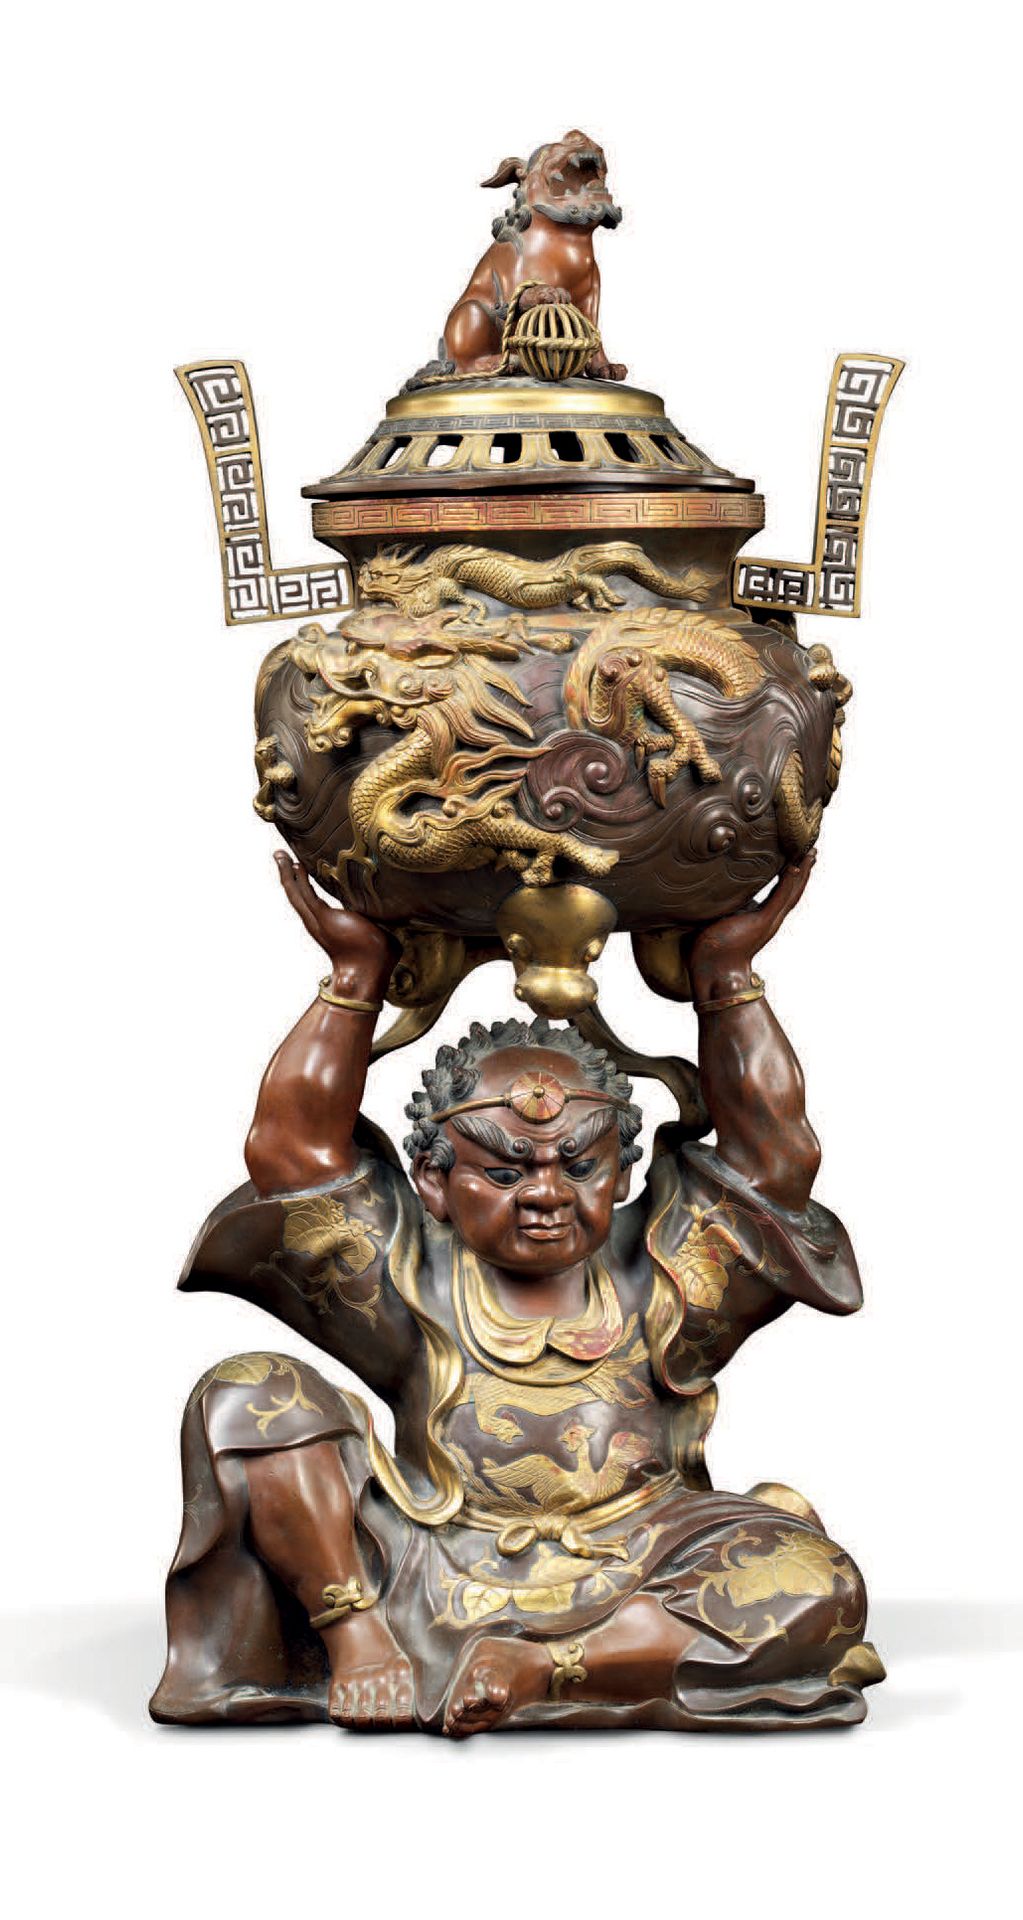 Null 
BURNER-PARFUM supported by a Buddhist deity

Japan, 19th century

Chased, &hellip;